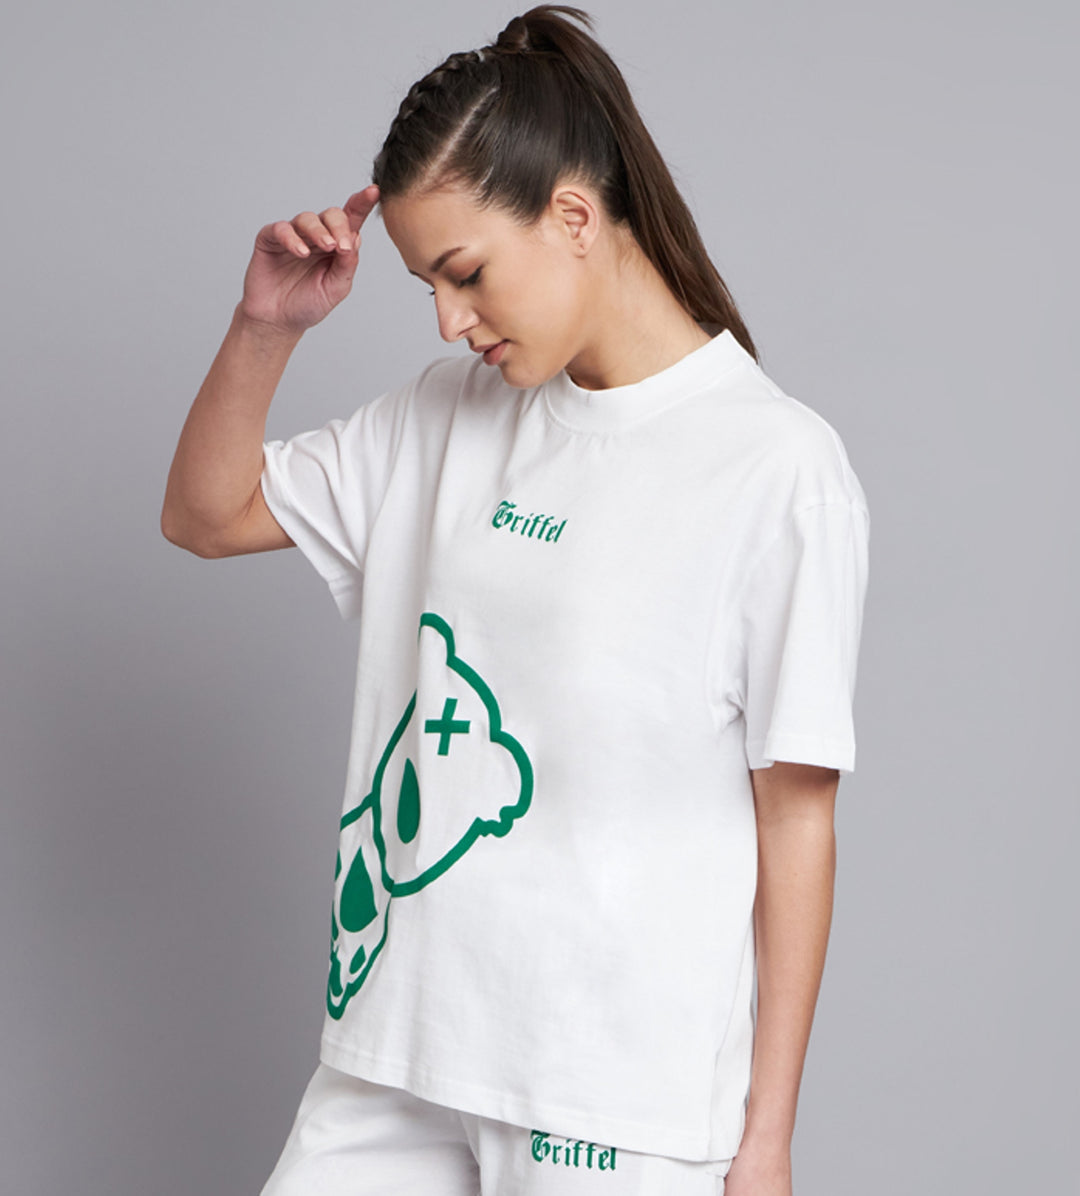 GRIFFEL Women Printed Green Teddy Oversized White T-shirt - griffel